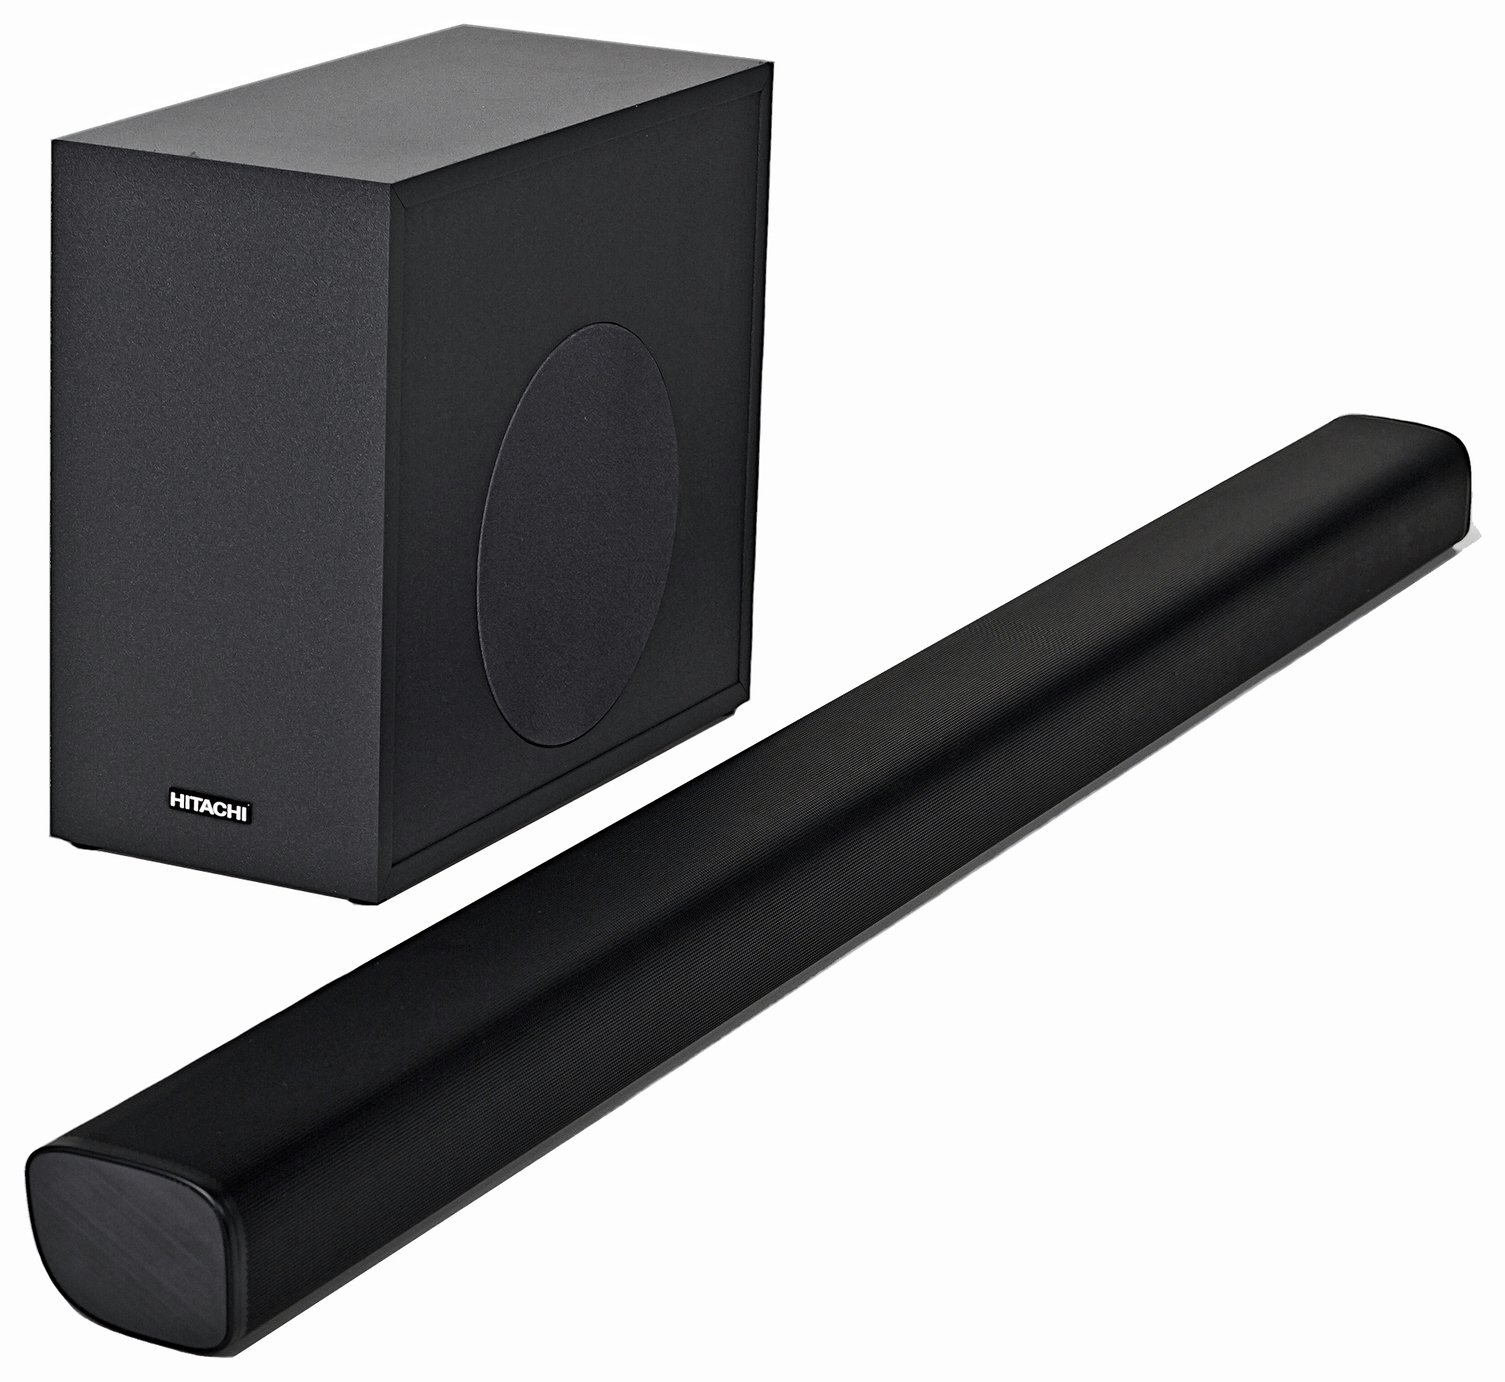 Hitachi 70W RMS 2.1Ch Sound Bar with Wireless Subwoofer Reviews